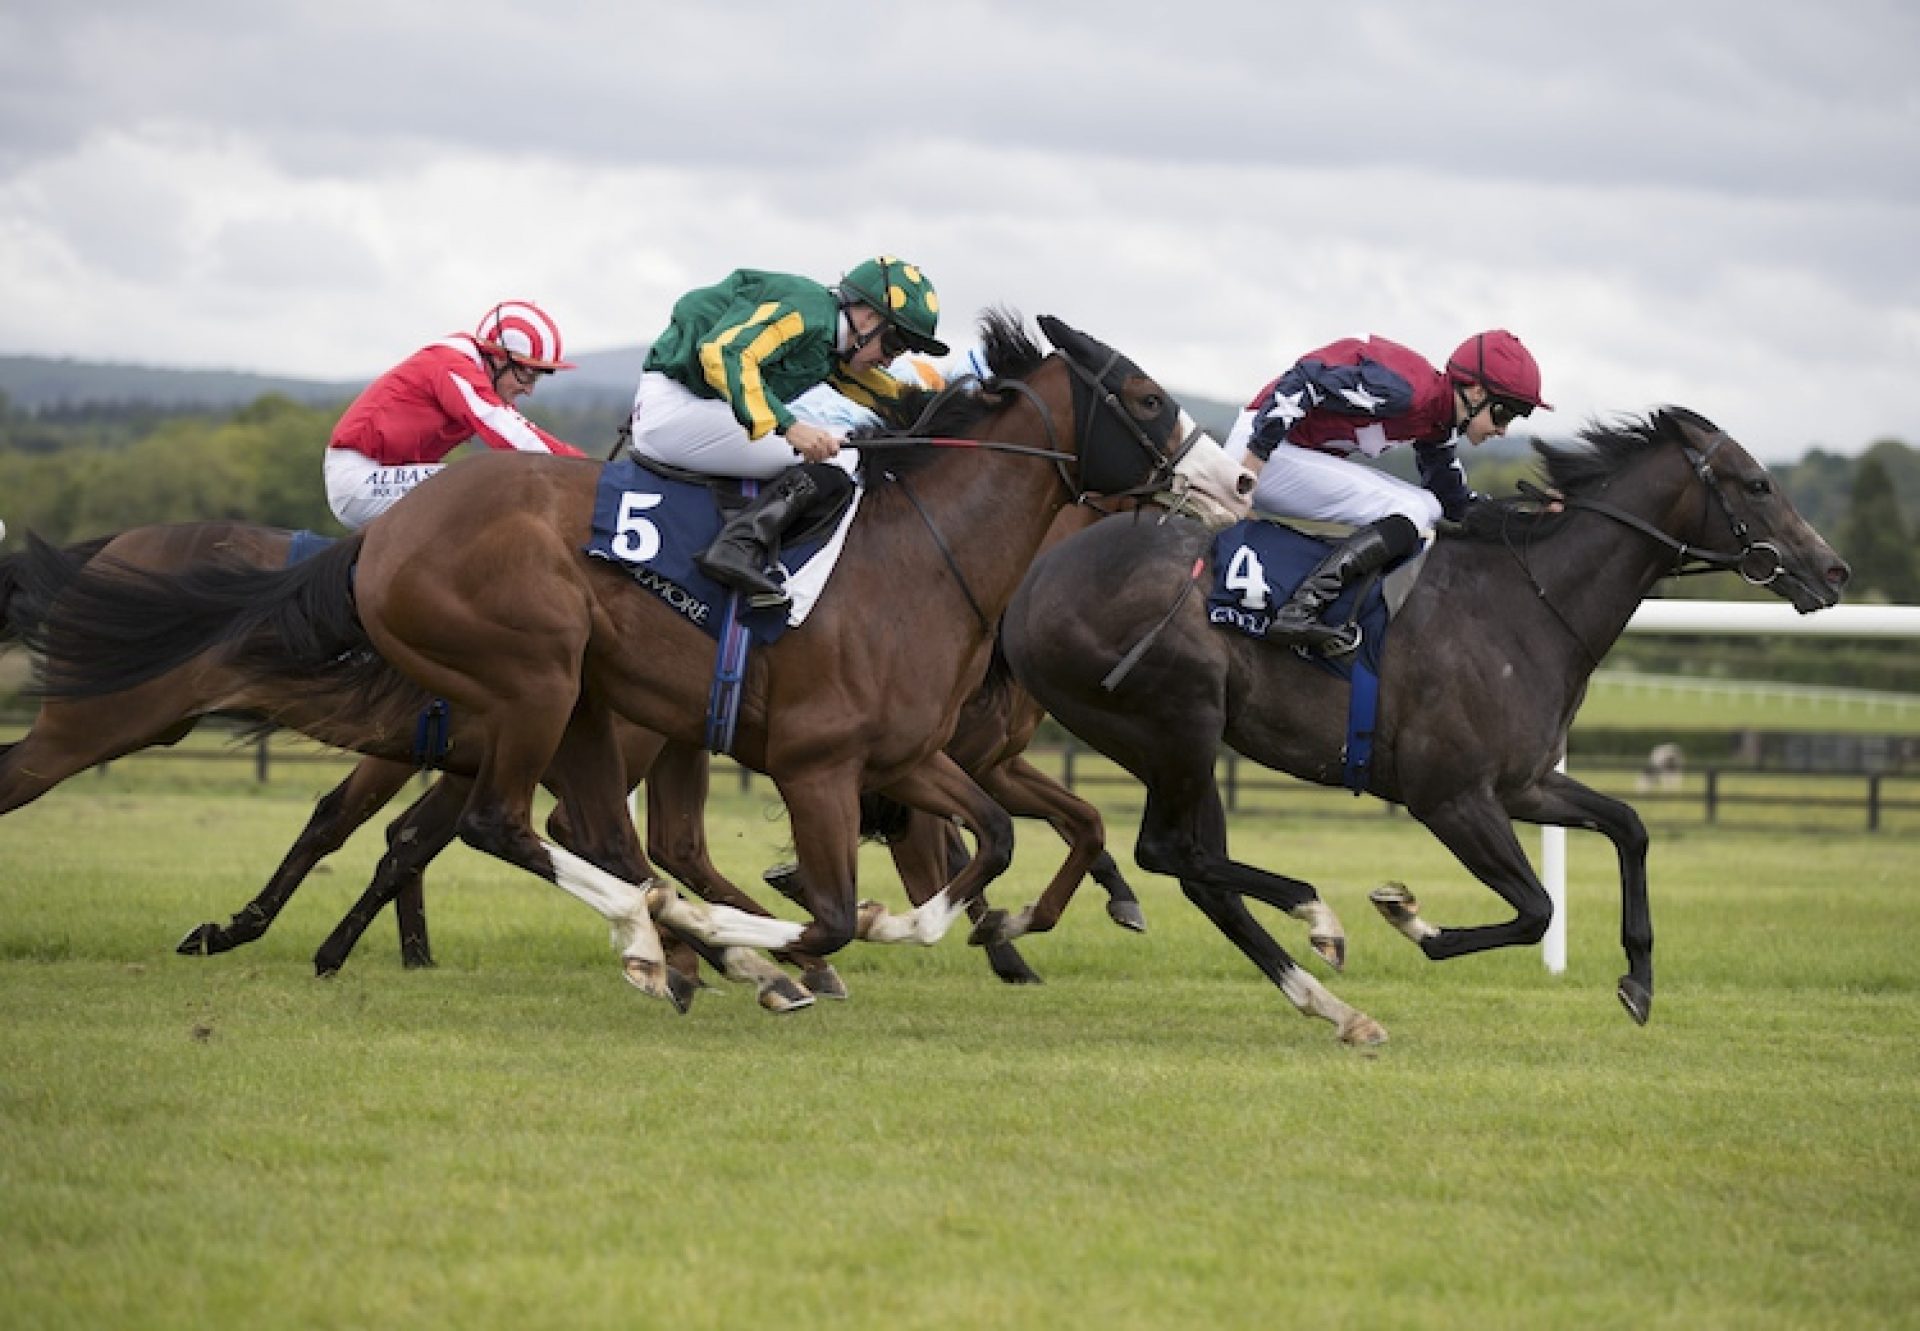 True Blue Moon (Holy Roman Emperor) winning the Listed Rochestown Stakes at Naas